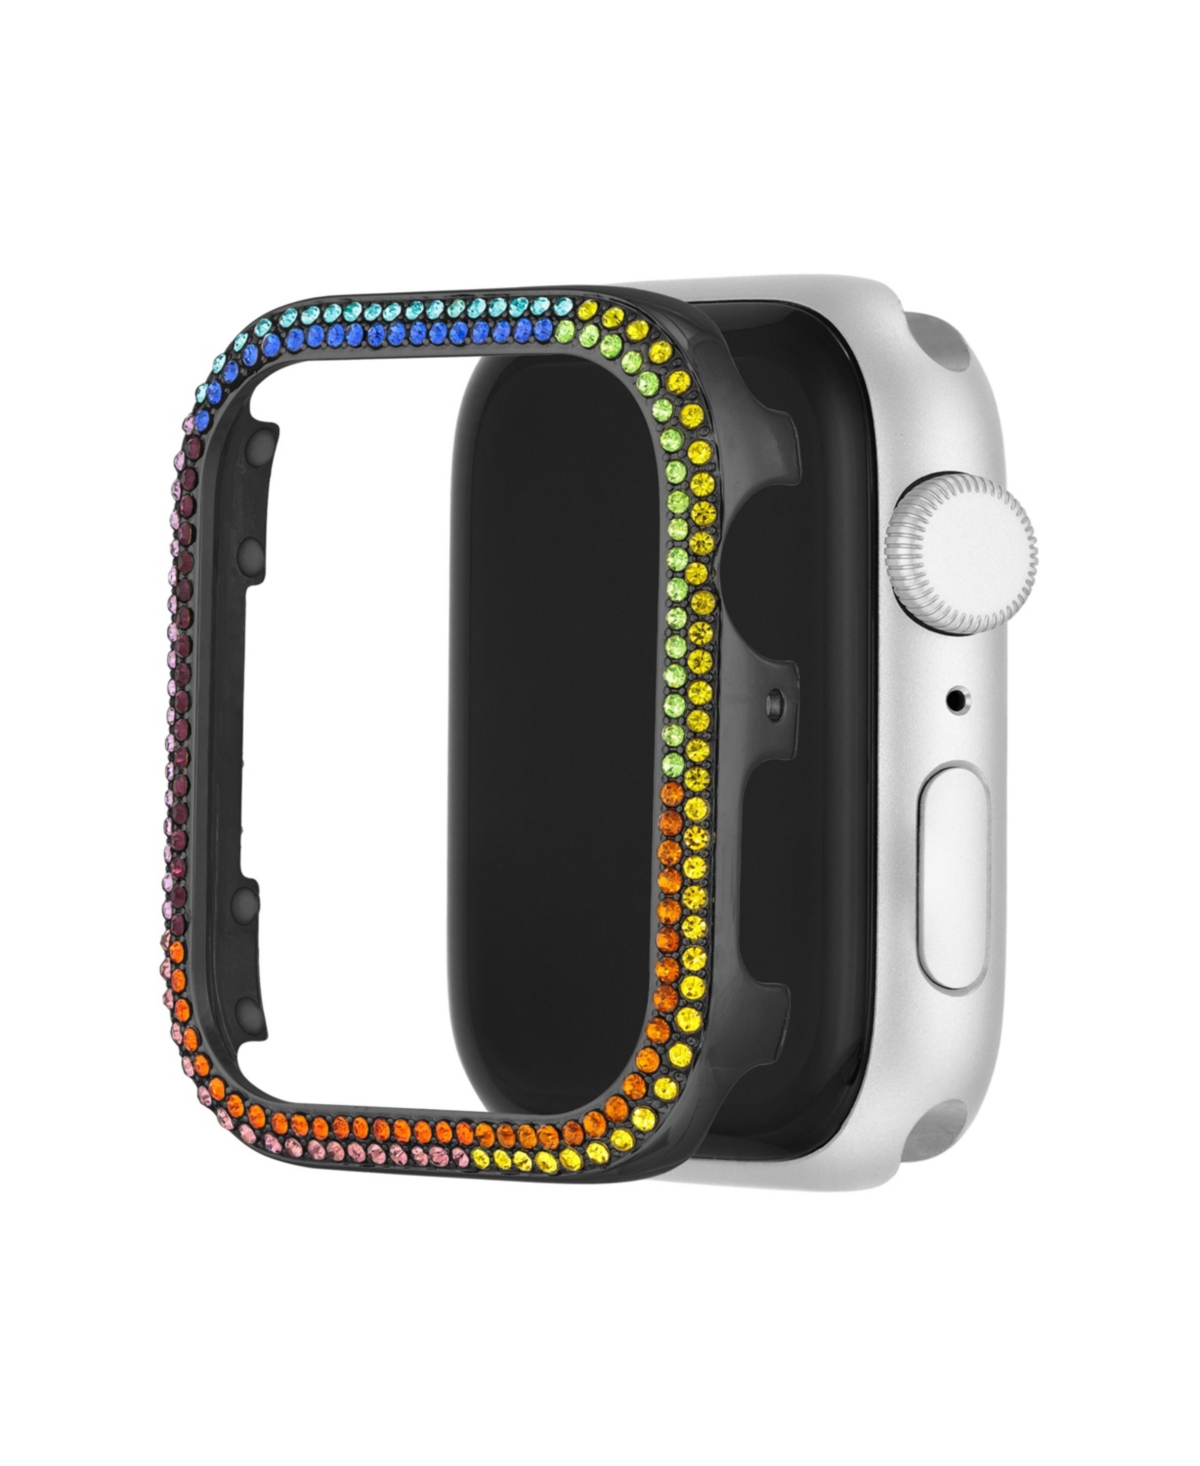 Steve Madden Women's Mixed Metal Apple Watch Bumper Accented With Rainbow Crystals, 44mm In Black